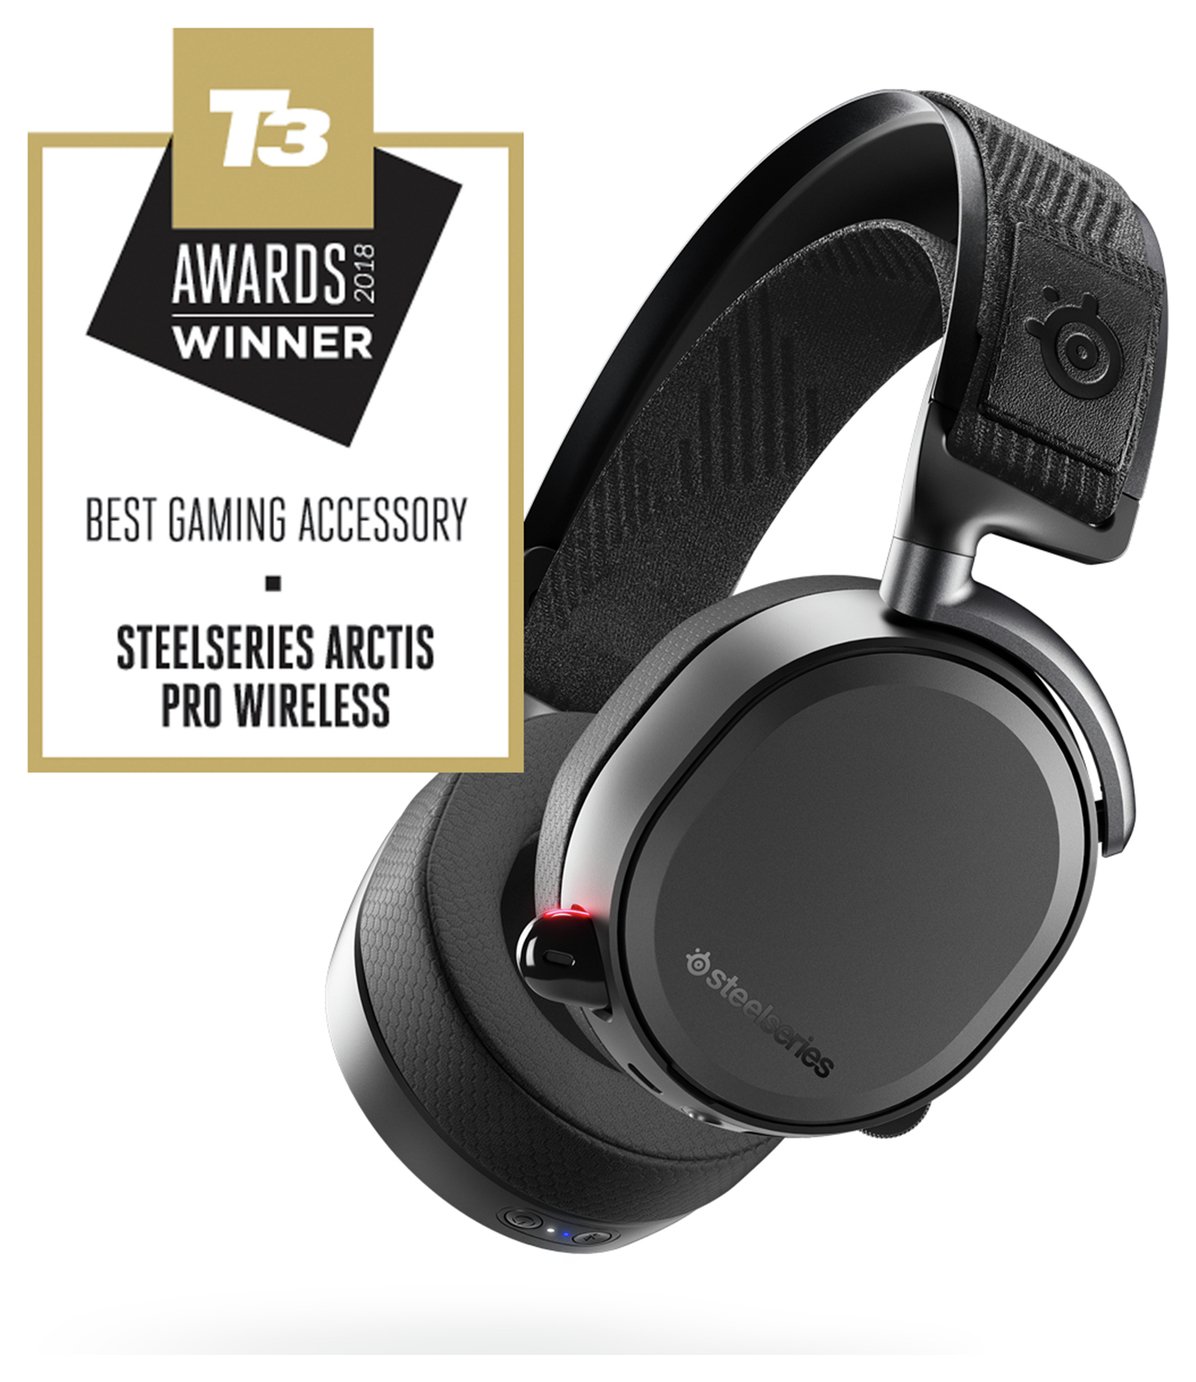 SteelSeries Arctis Pro Wireless PS4 Headset Review